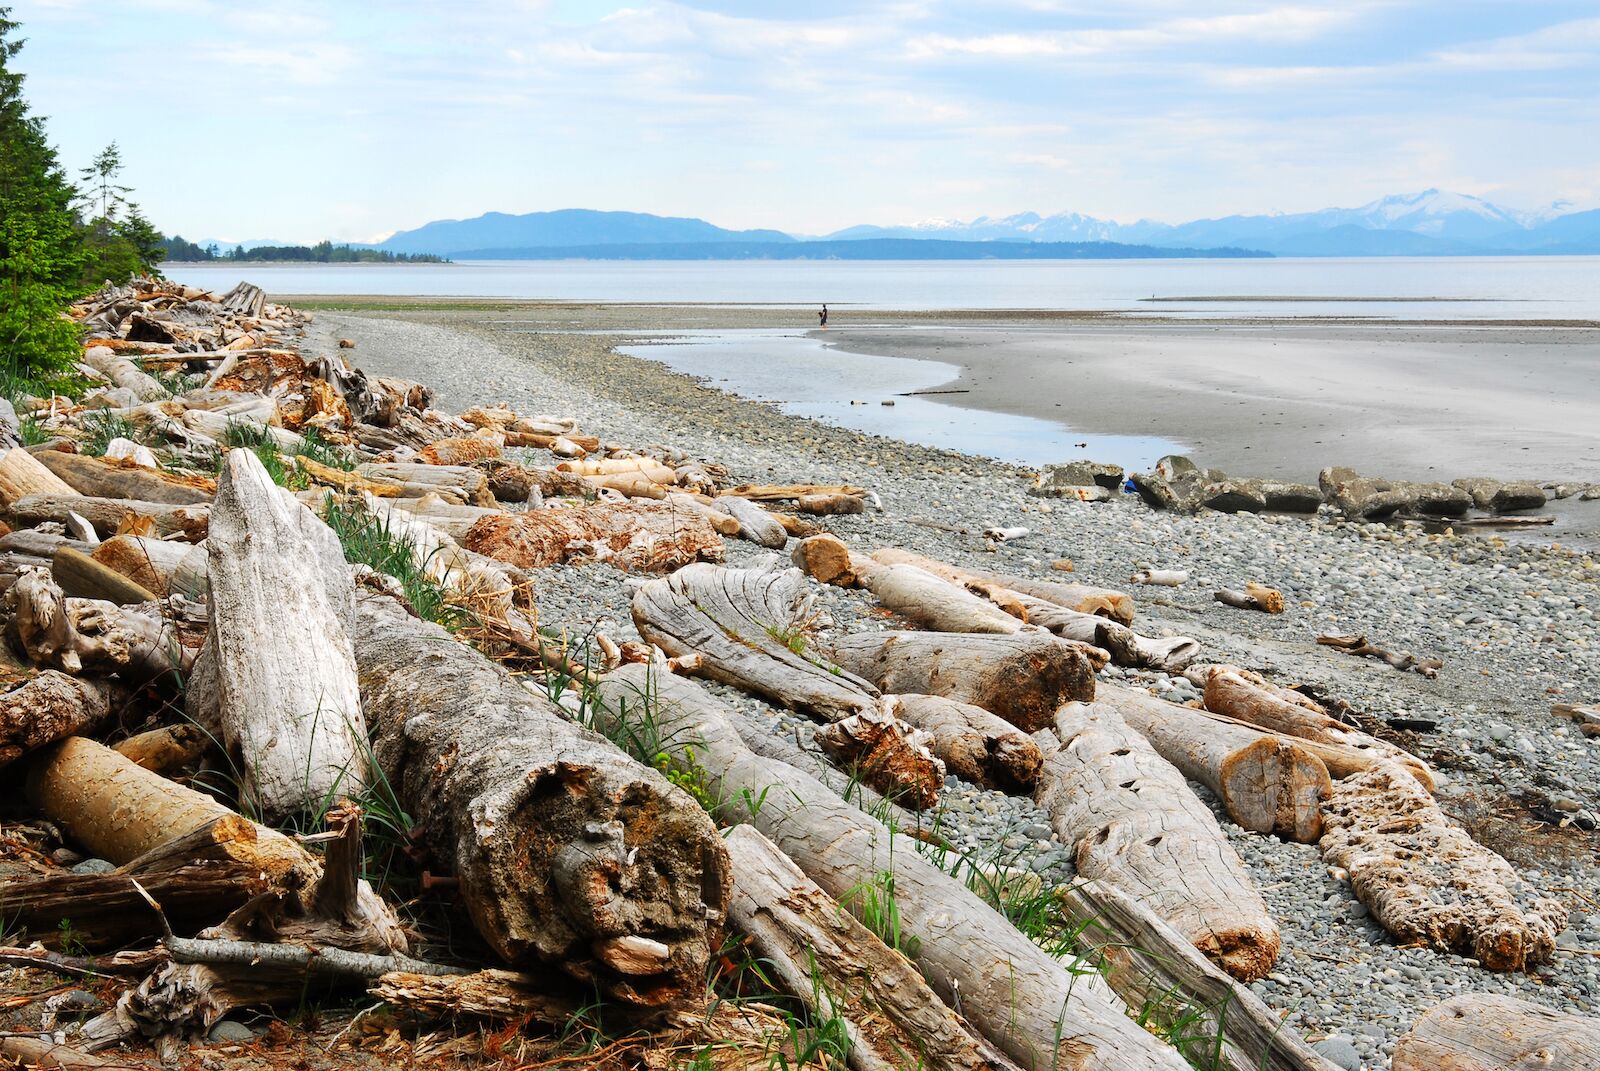 Beach at Qualicum Beach, a Canadian small town on Vancouver Island